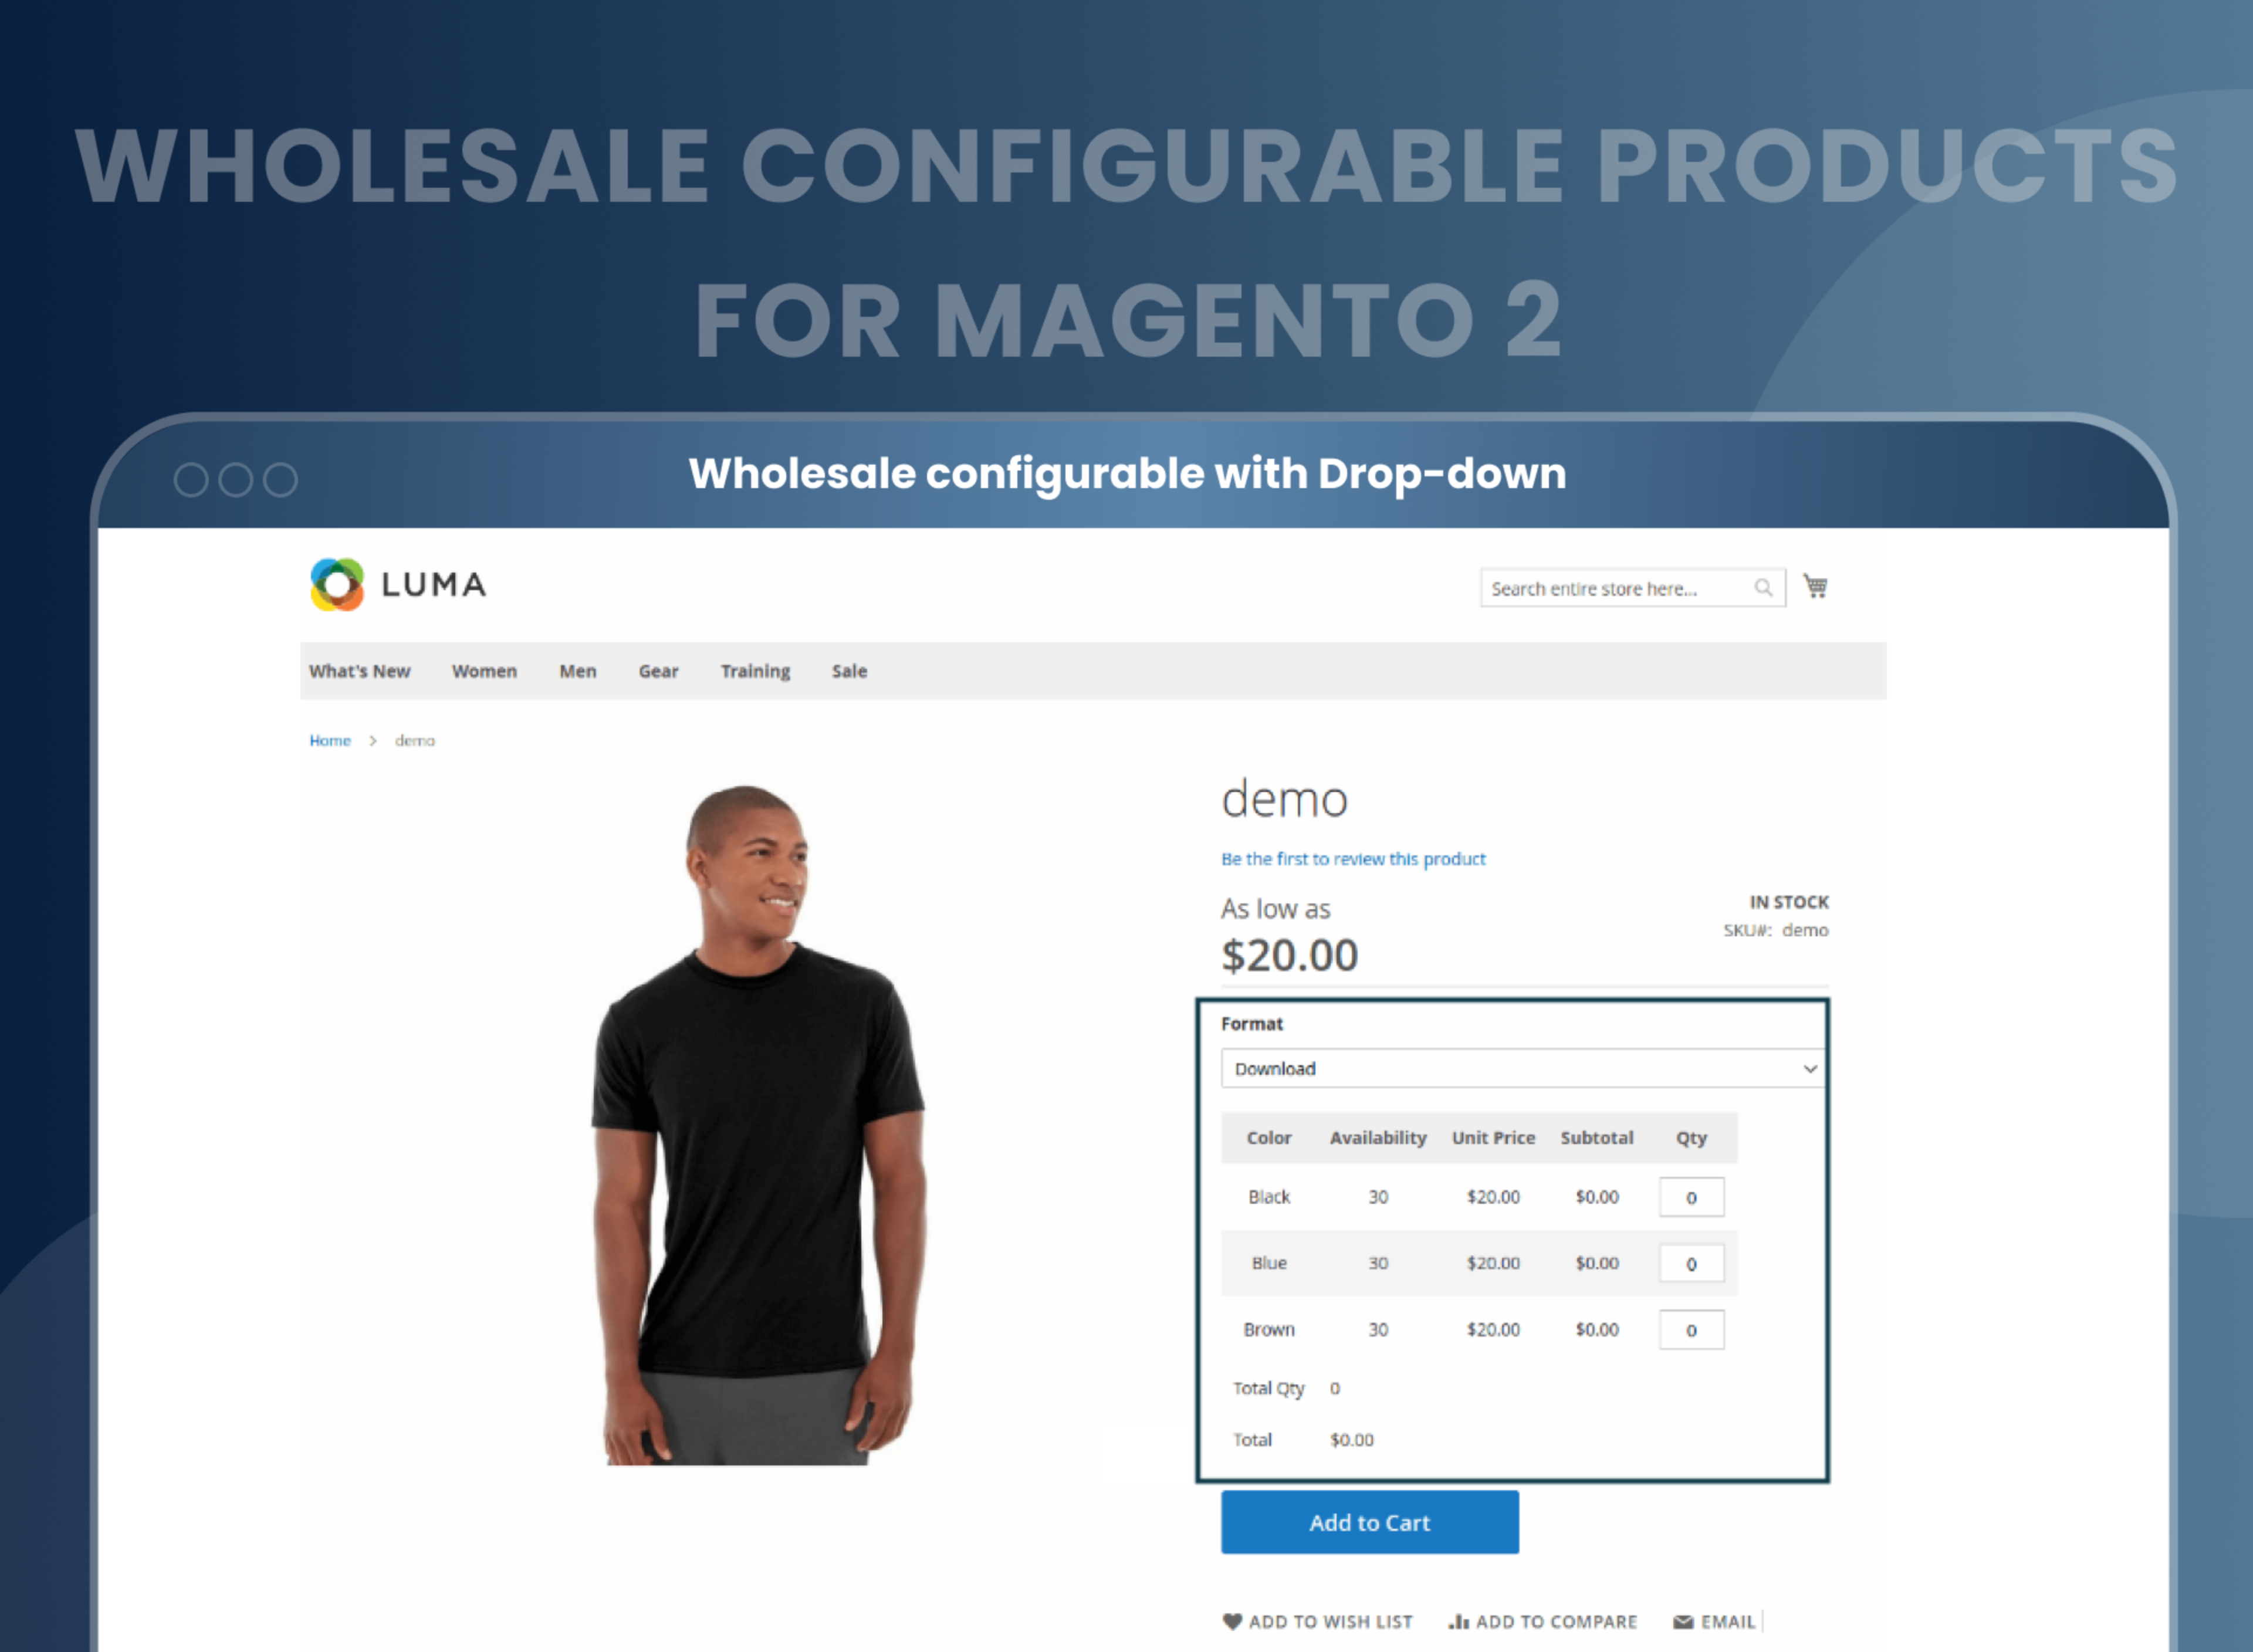 Wholesale configurable with Drop-down